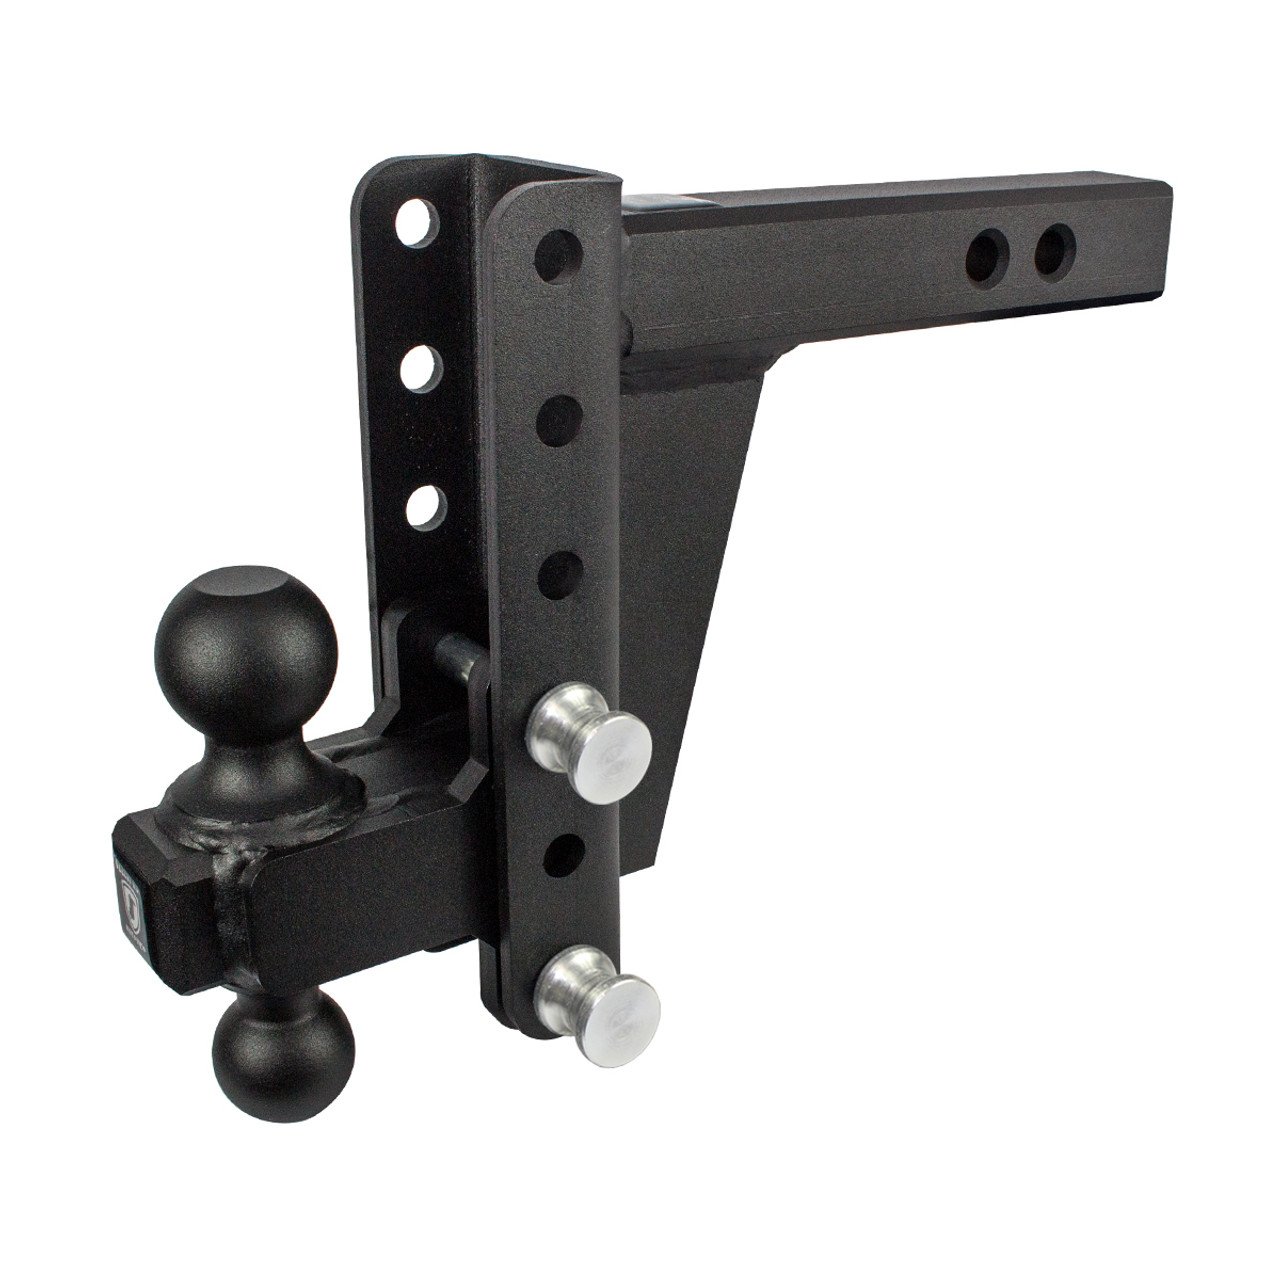 2.0” Extreme Duty 4” Drop/Rise Trailer Hitch